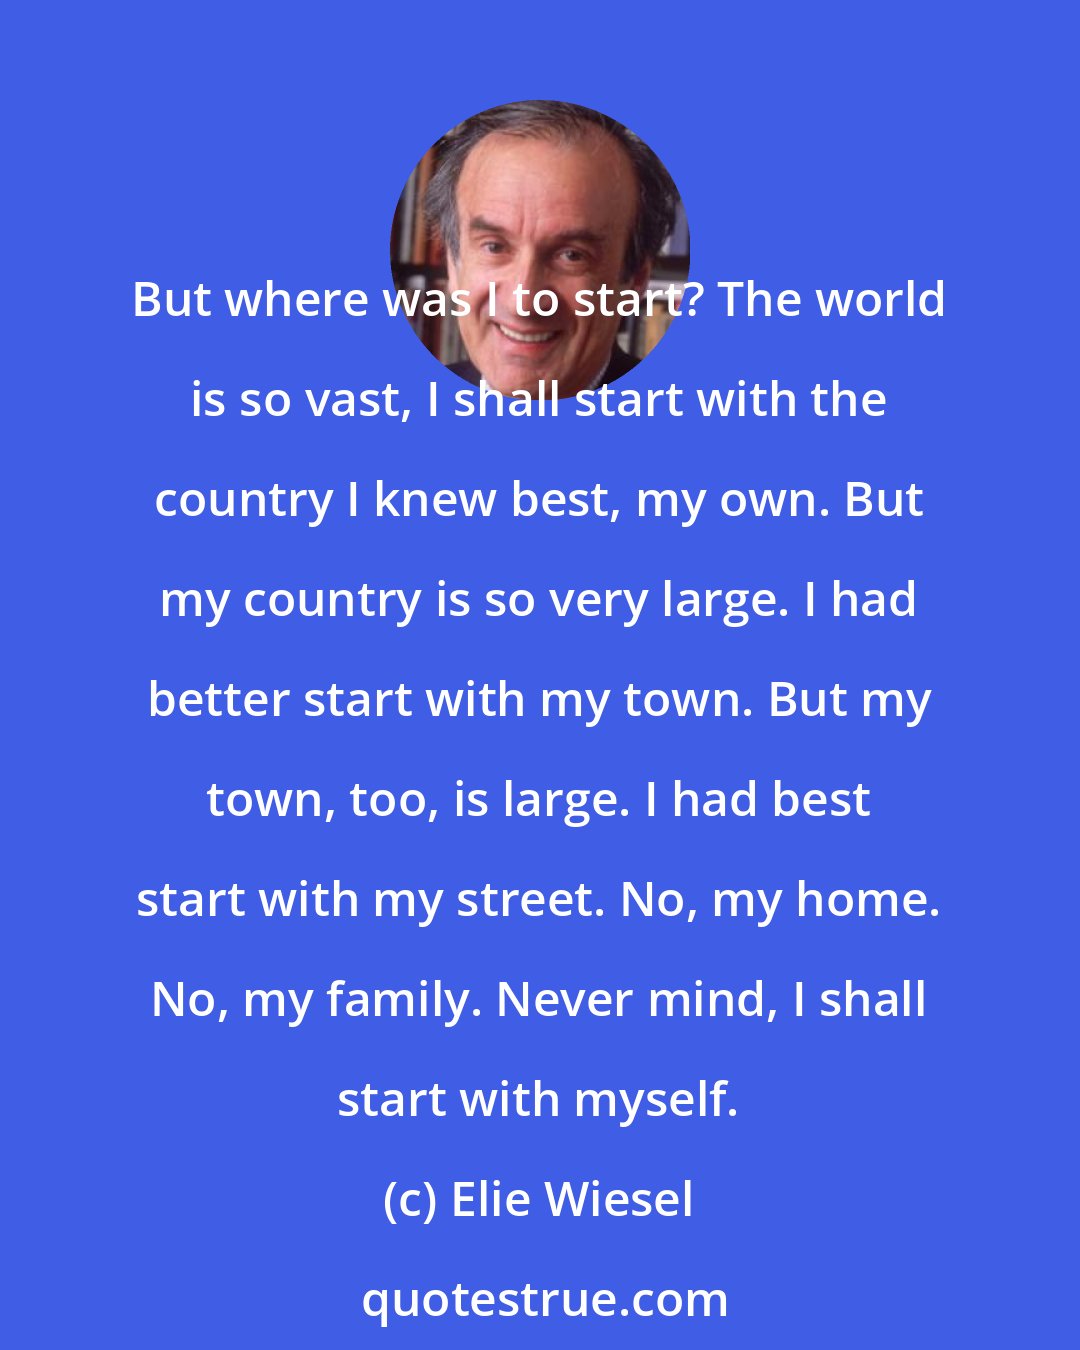 Elie Wiesel: But where was I to start? The world is so vast, I shall start with the country I knew best, my own. But my country is so very large. I had better start with my town. But my town, too, is large. I had best start with my street. No, my home. No, my family. Never mind, I shall start with myself.